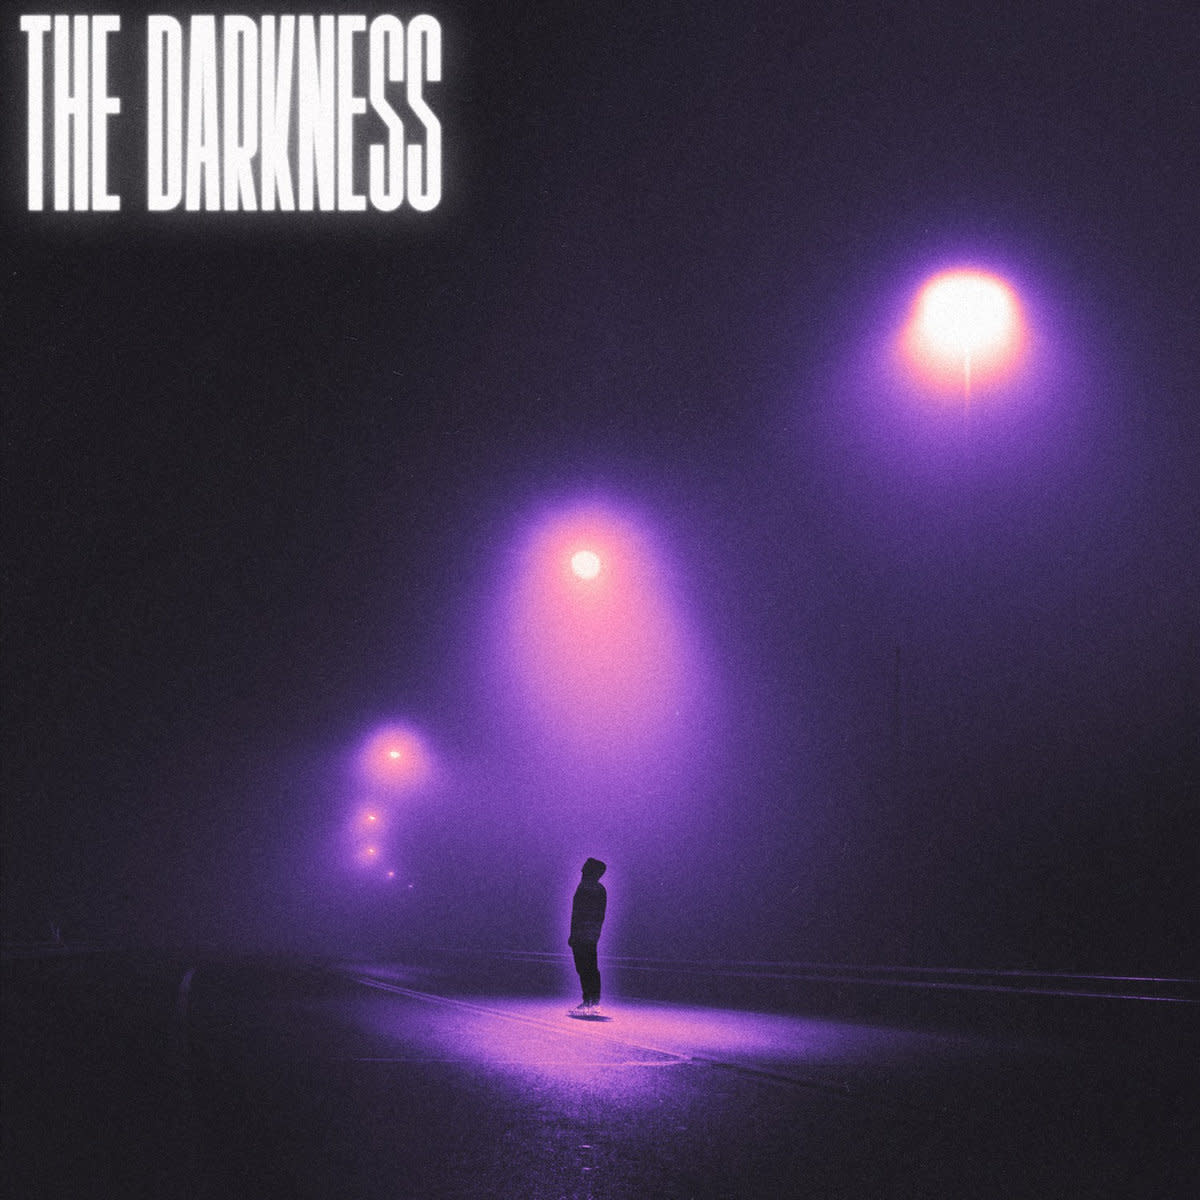 synth-single-review-the-darkness-by-brian-hazard